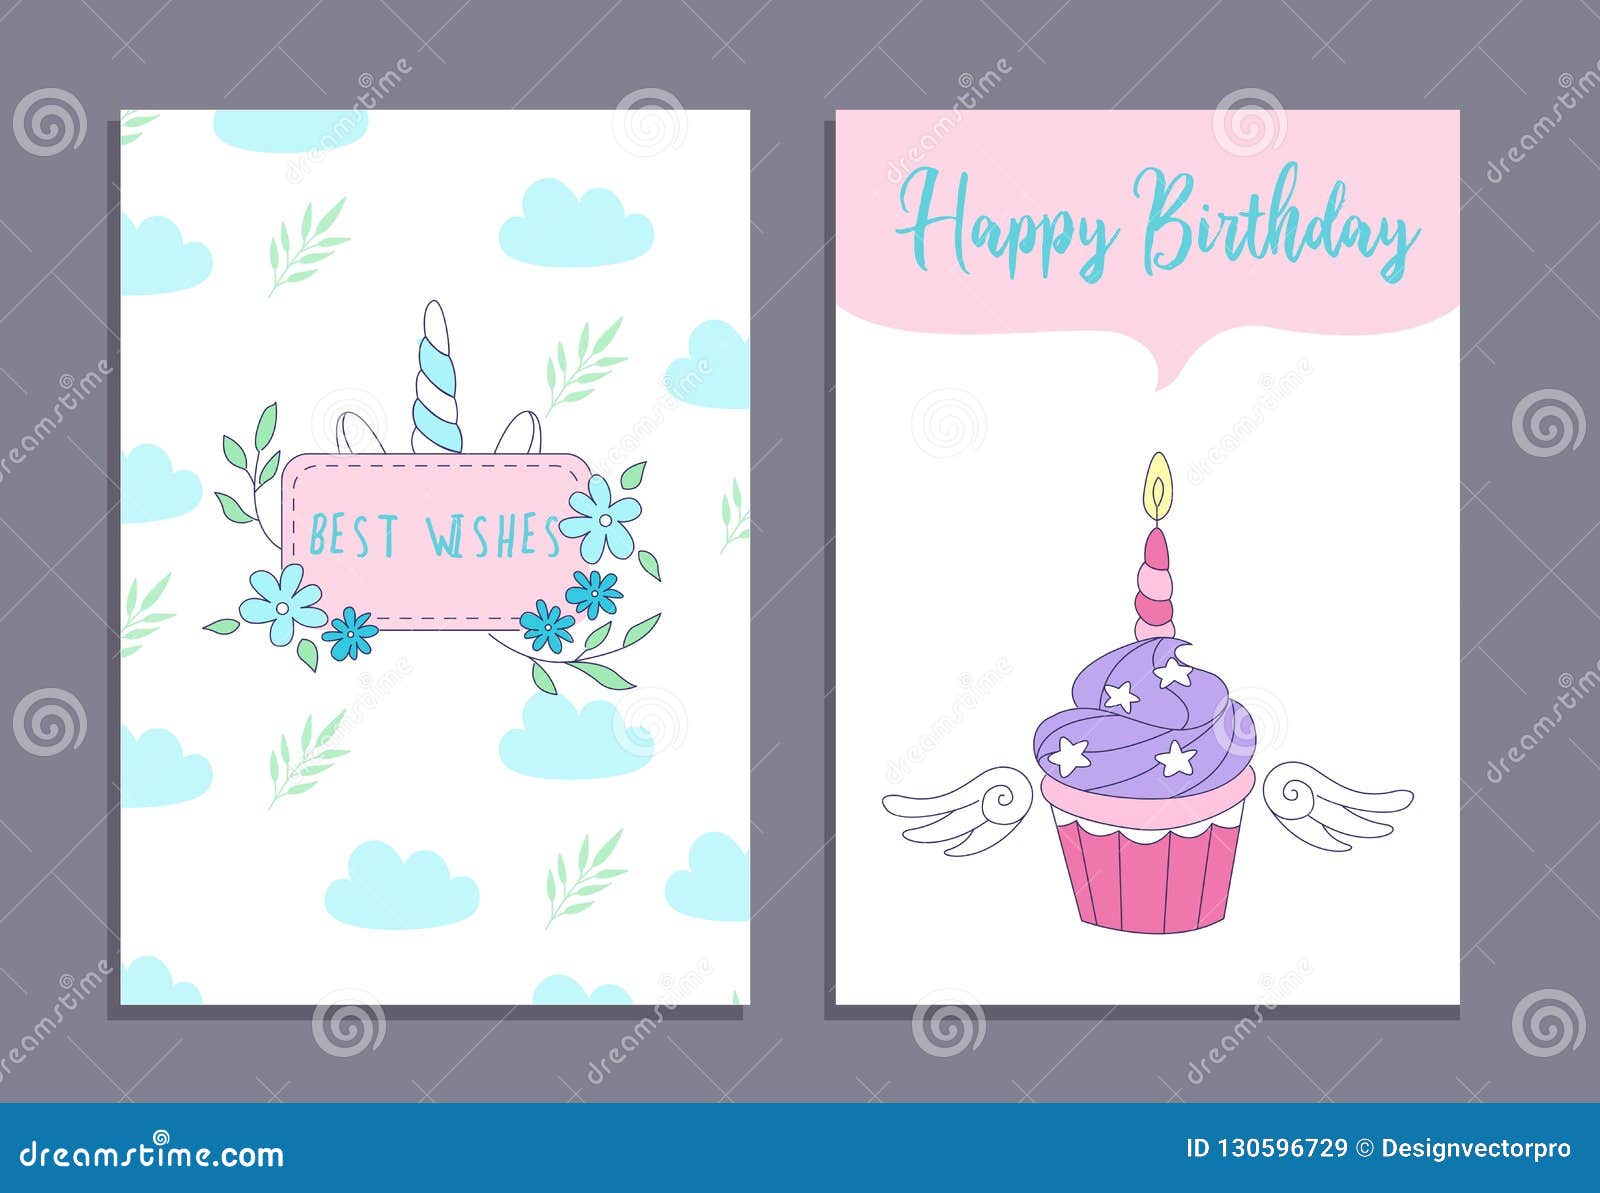 Happy Birthday Greeting Cards Set With Unicorn Cake And Cute